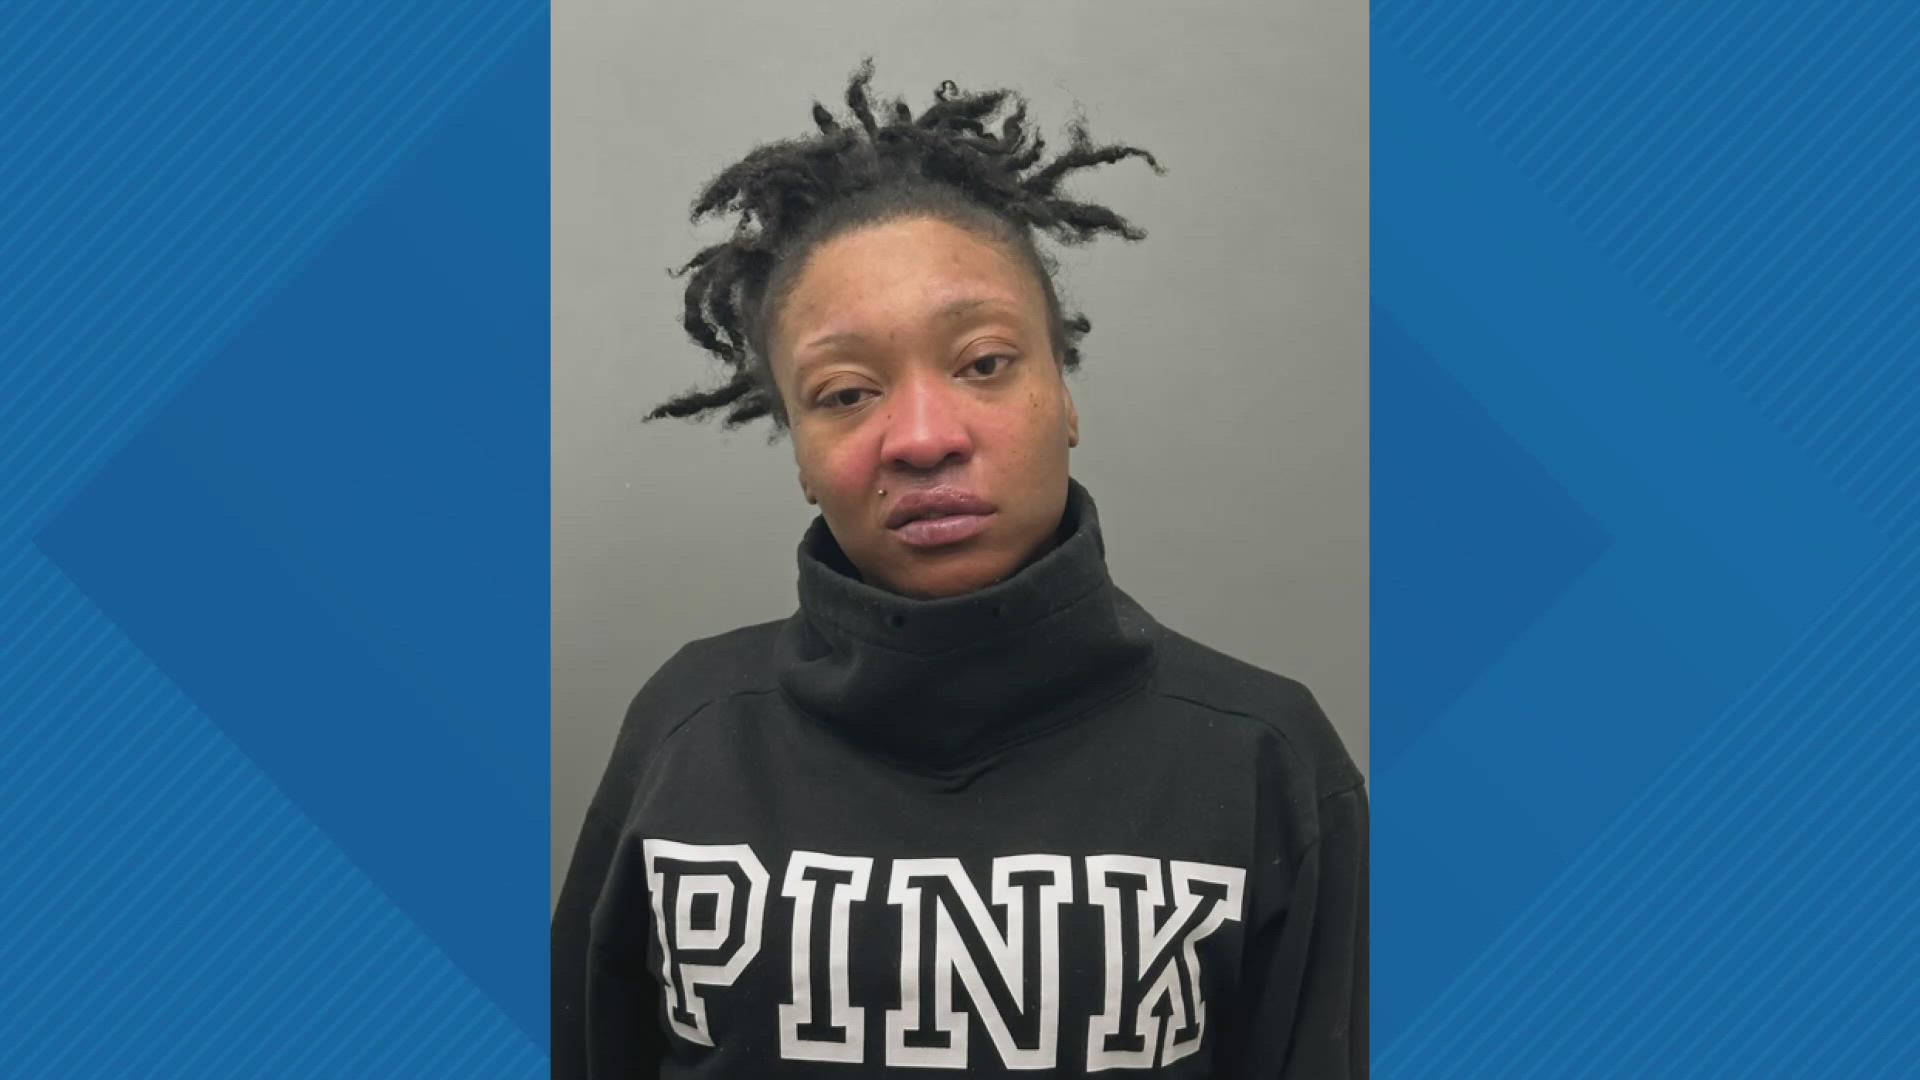 Police said 1-year-old Harmony Baker died after being exposed to fentanyl at a St. Louis County home. 32-year-old Cherelle Nolan was charged on Friday.